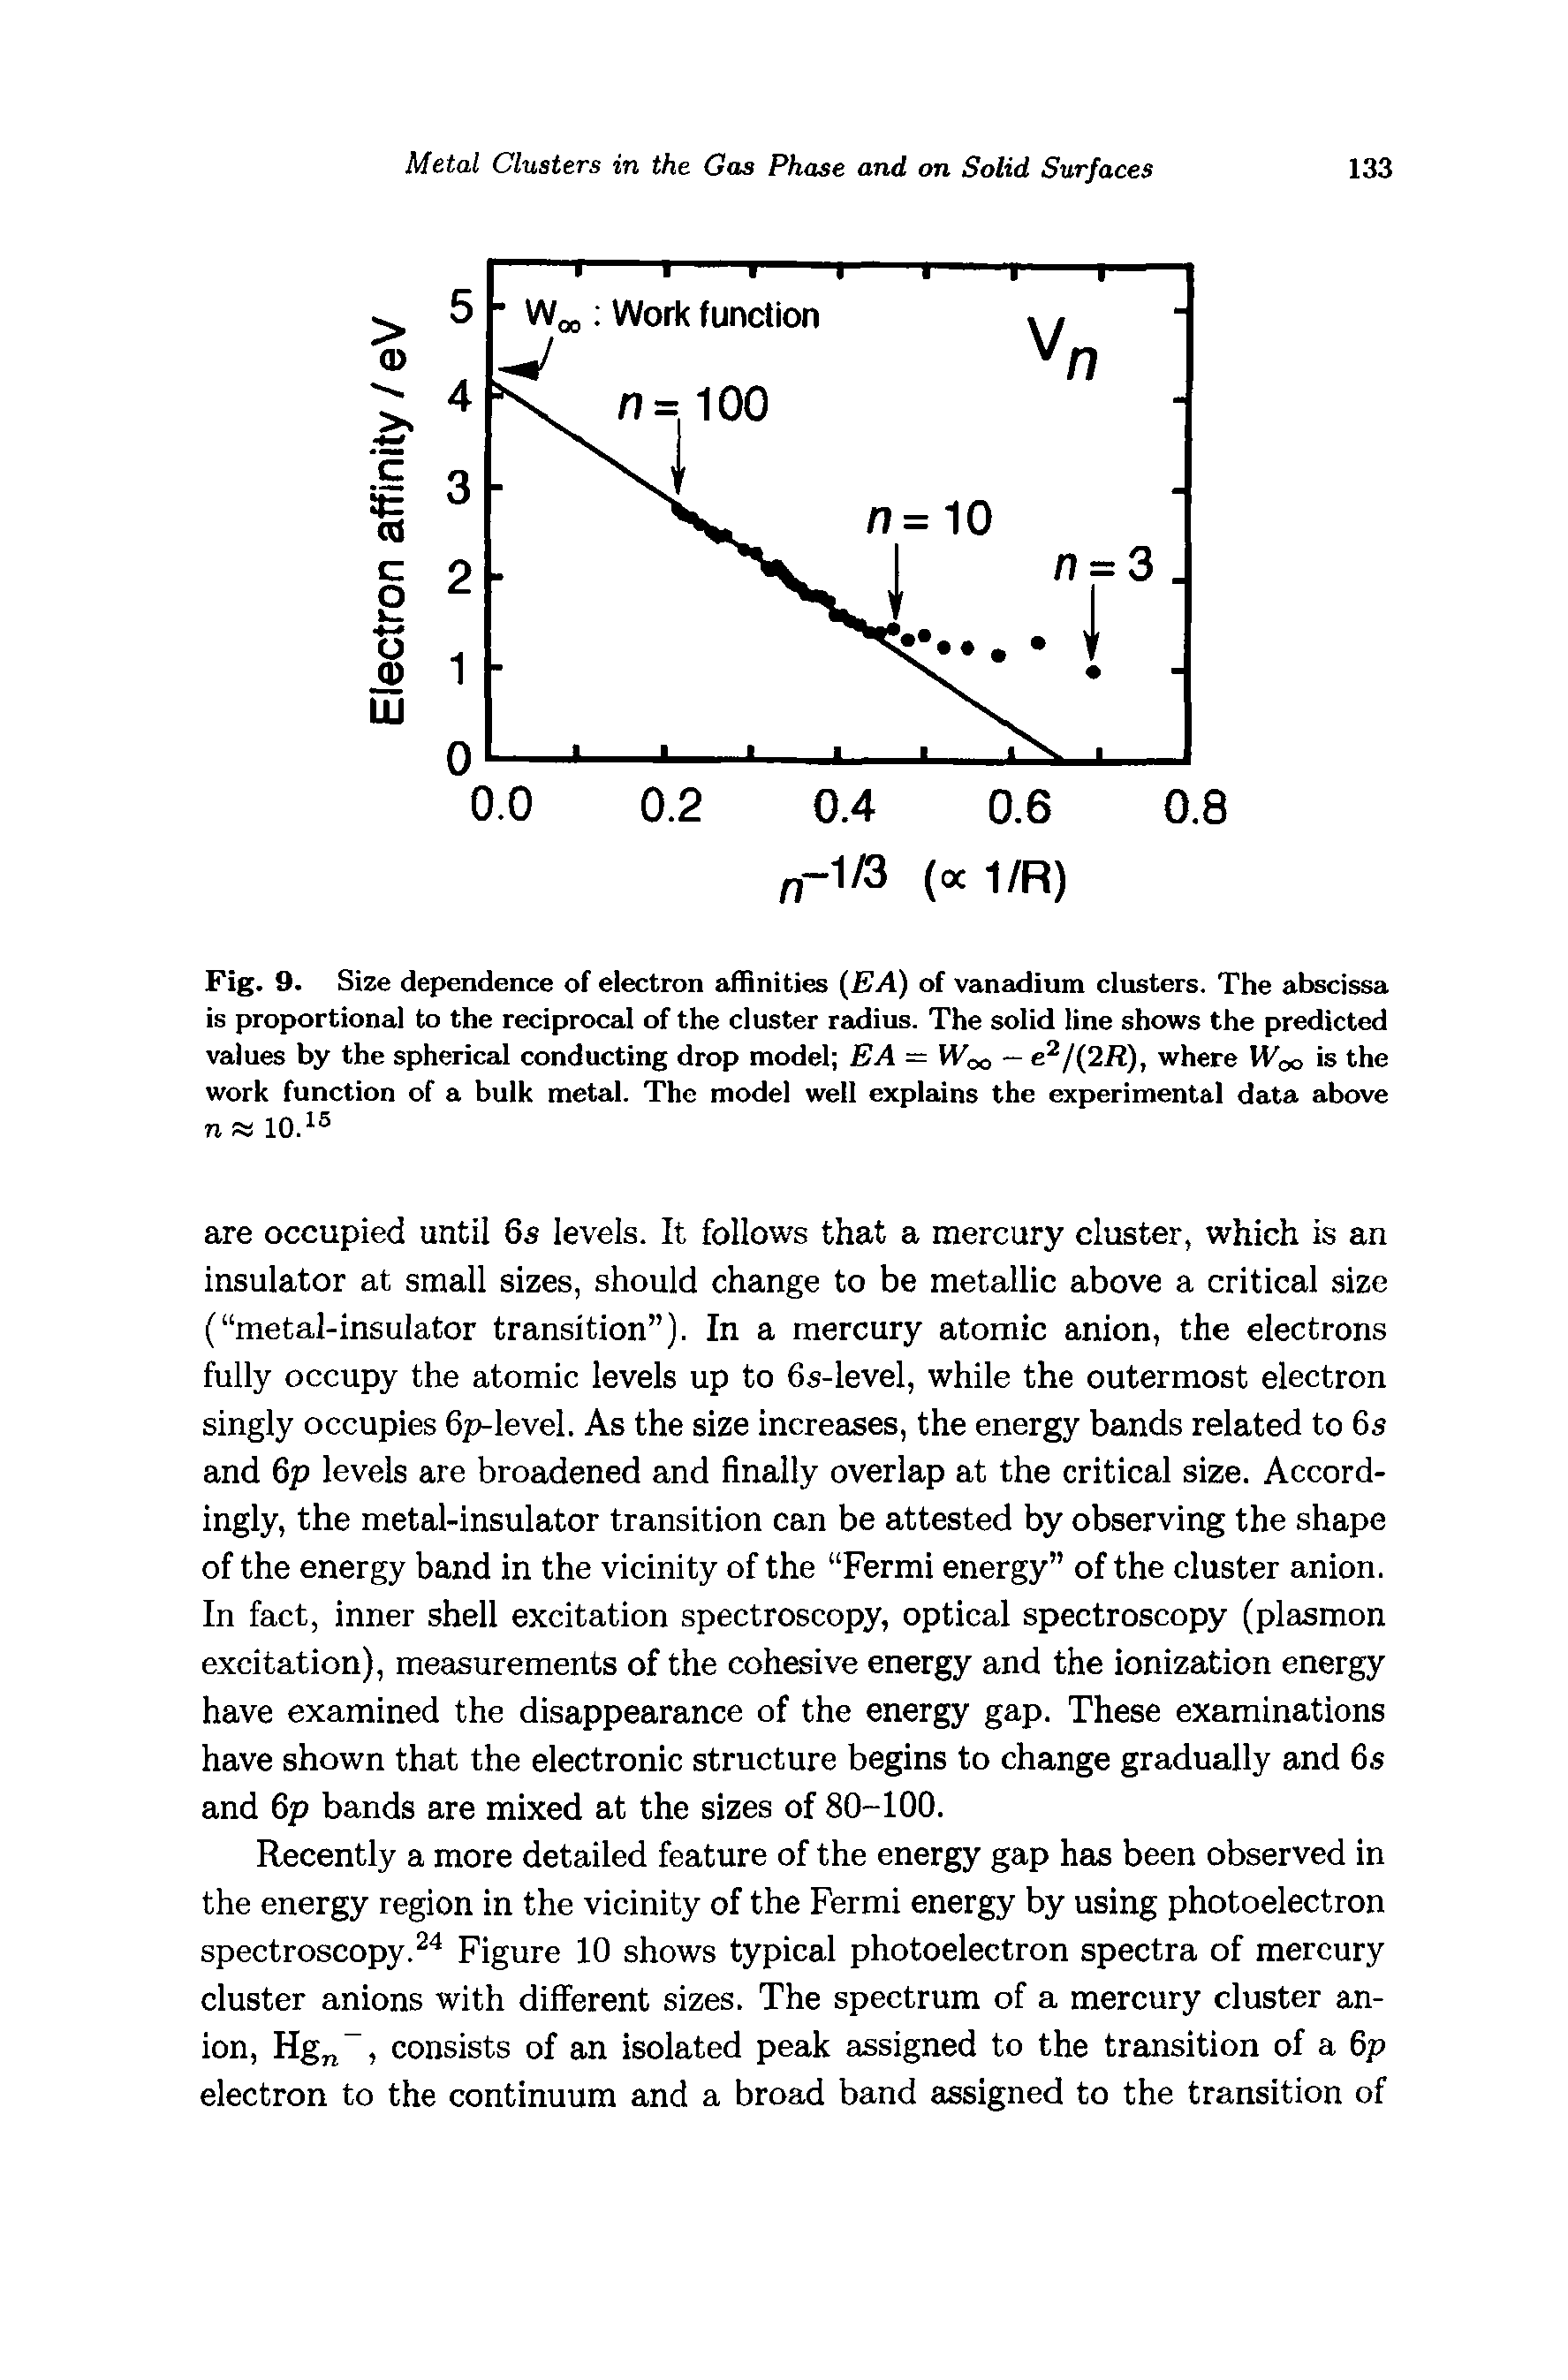 Fig. 9. Size dependence of electron affinities (EA) of vanadium clusters. The abscissa is proportional to the reciprocal of the cluster radius. The solid line shows the predicted values by the spherical conducting drop model BA = Woa — c /(2fl), where IVoo is the work function of a bulk metal. The model well explains the experimental data above n 10. ...